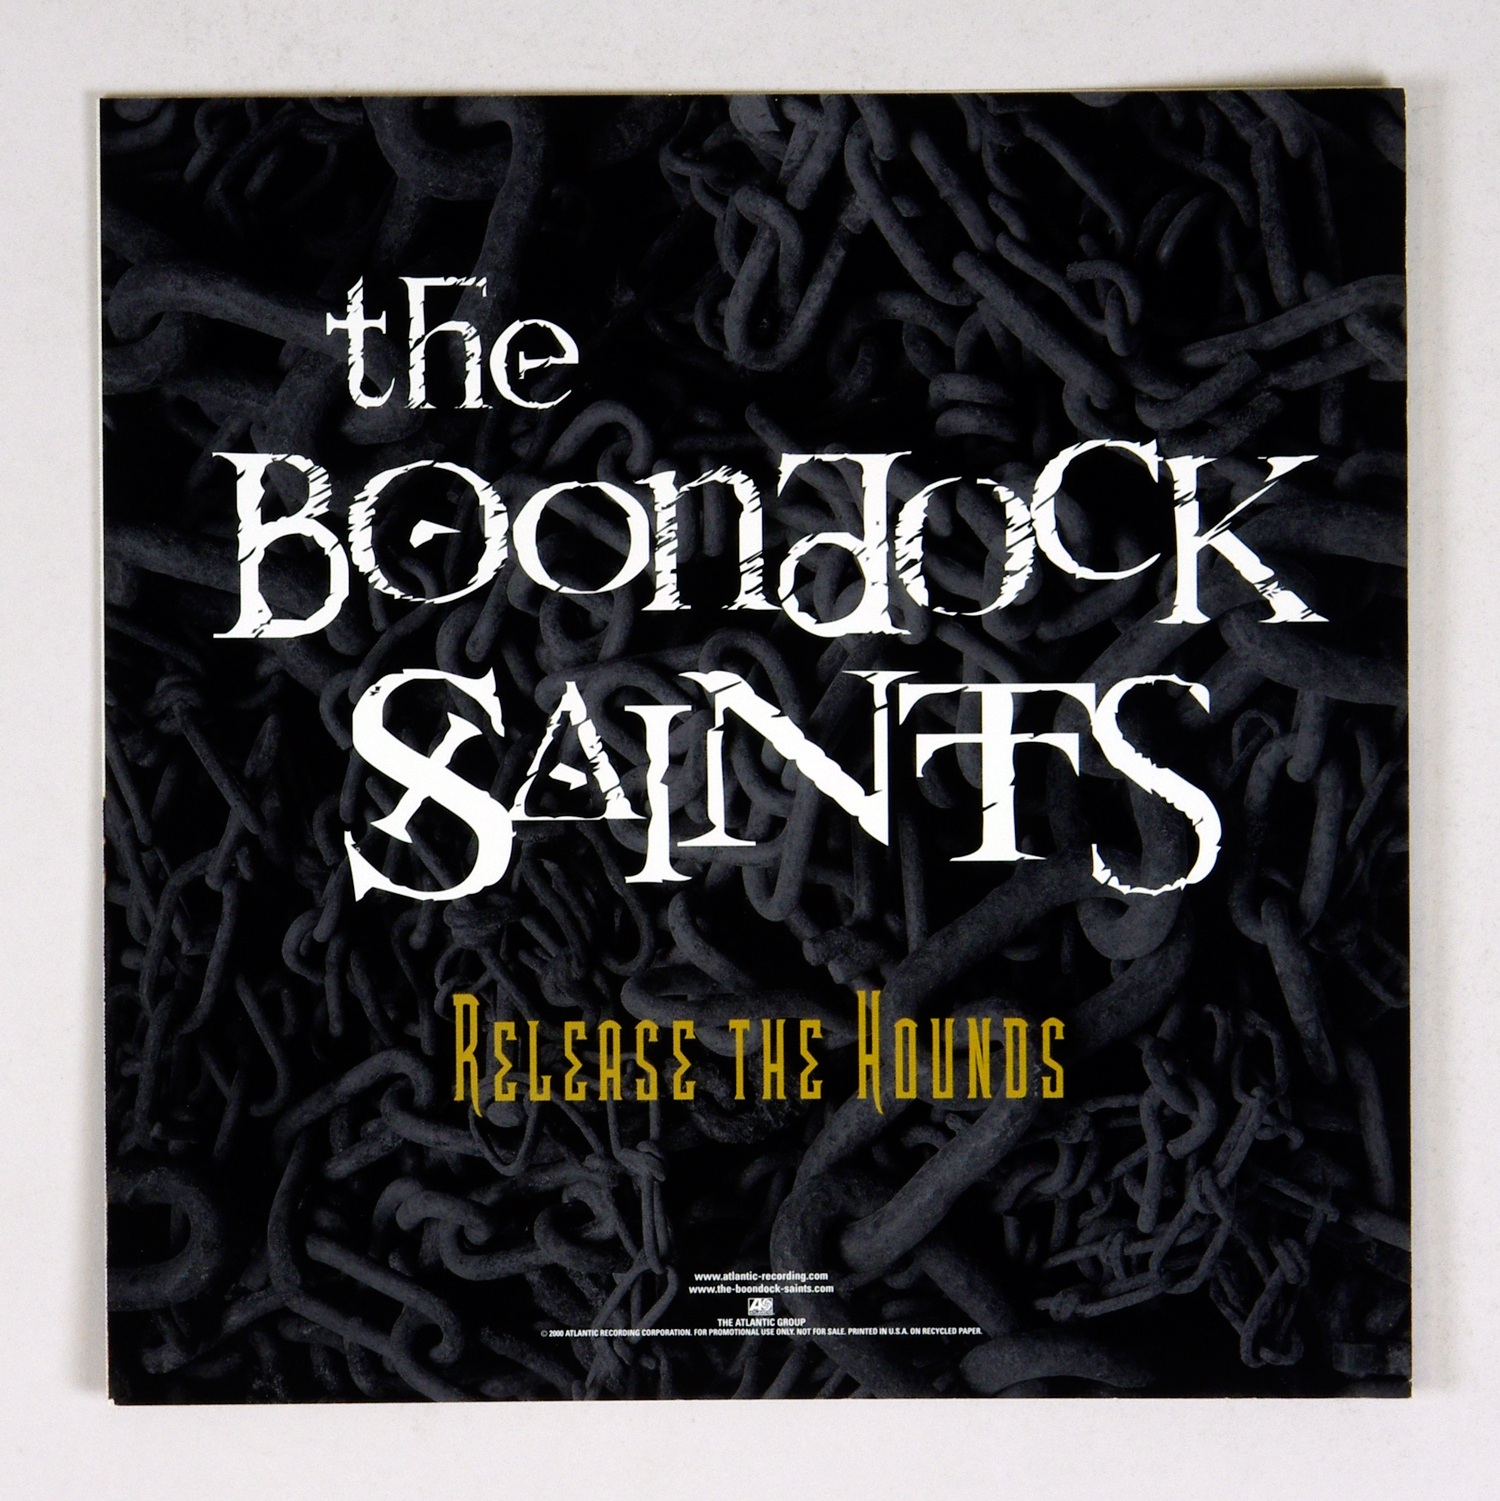 The Boondock Saints Poster Flat 2002 Release the Hounds Album Promotion 12 x 12 